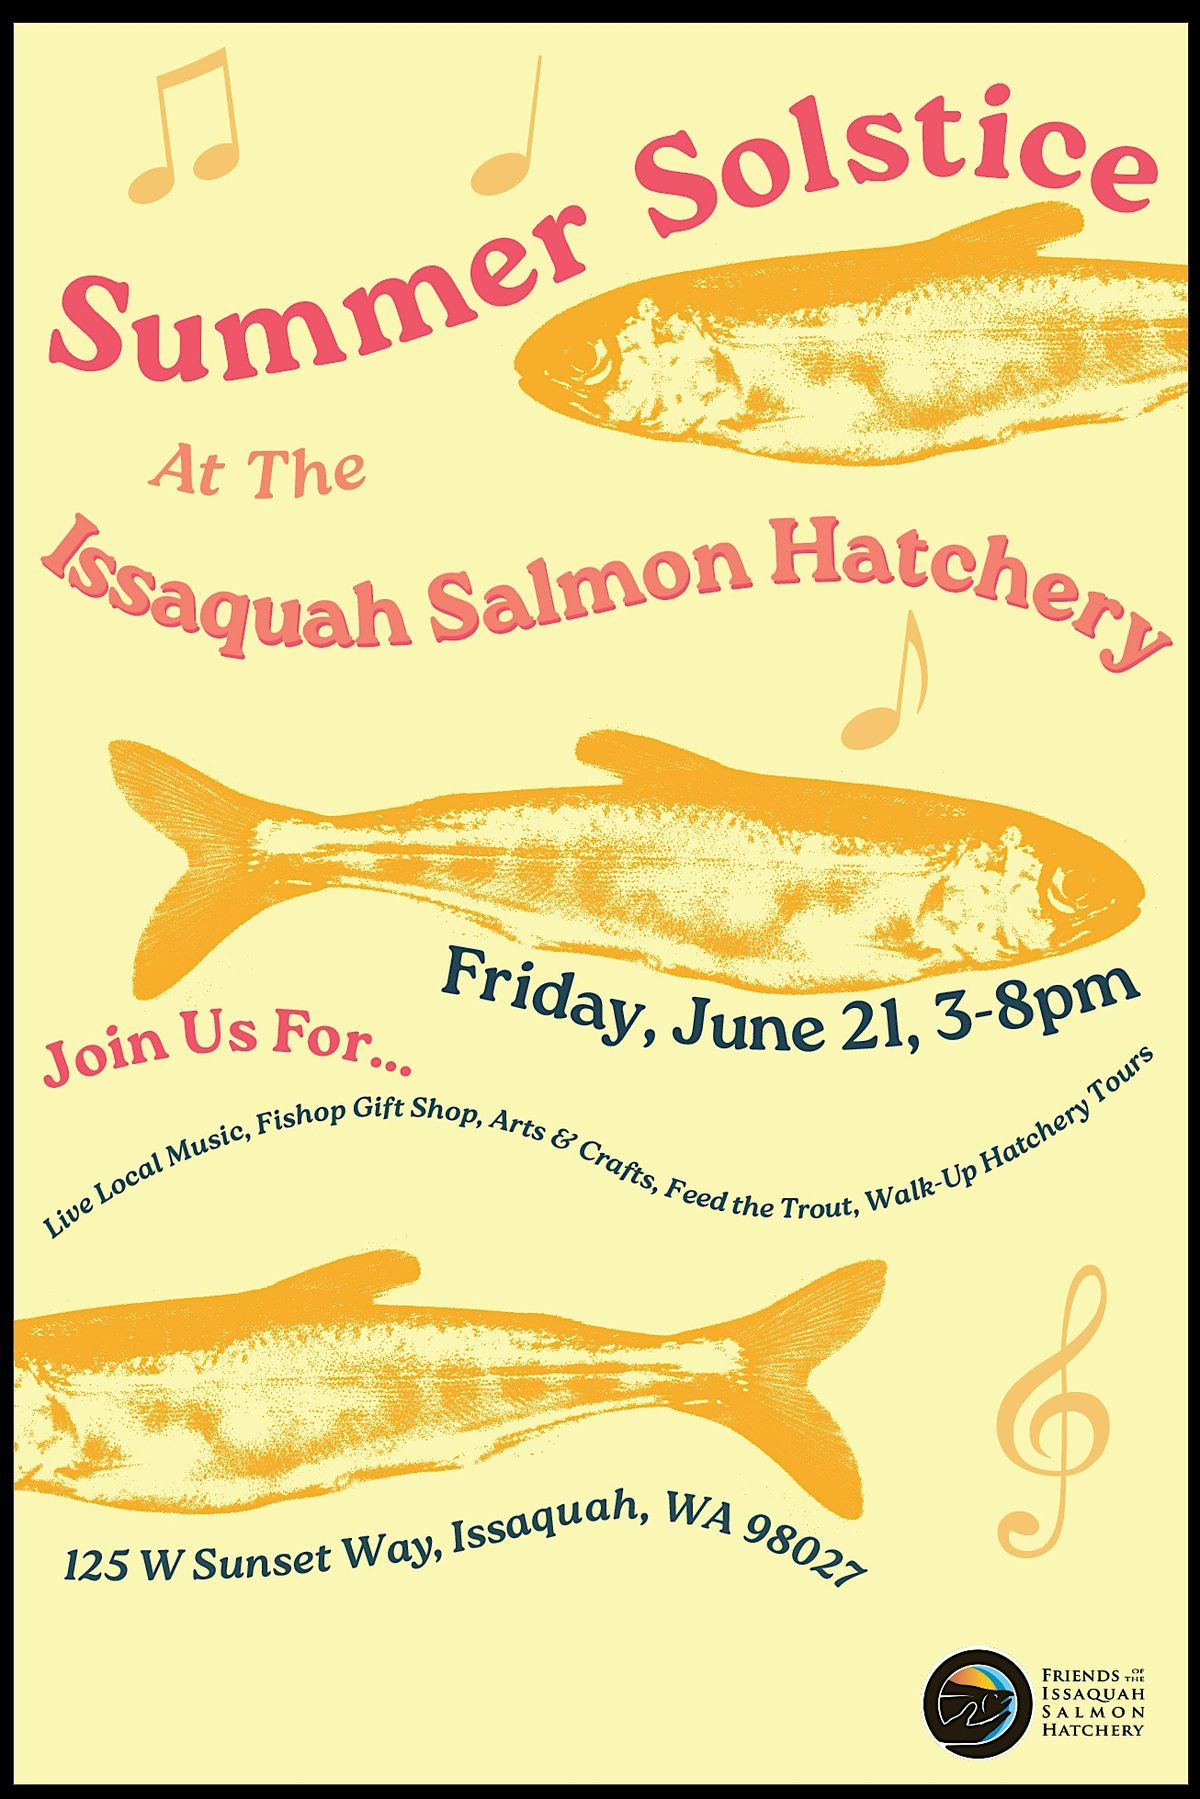 Summer Solstice at the Issaquah Hatchery